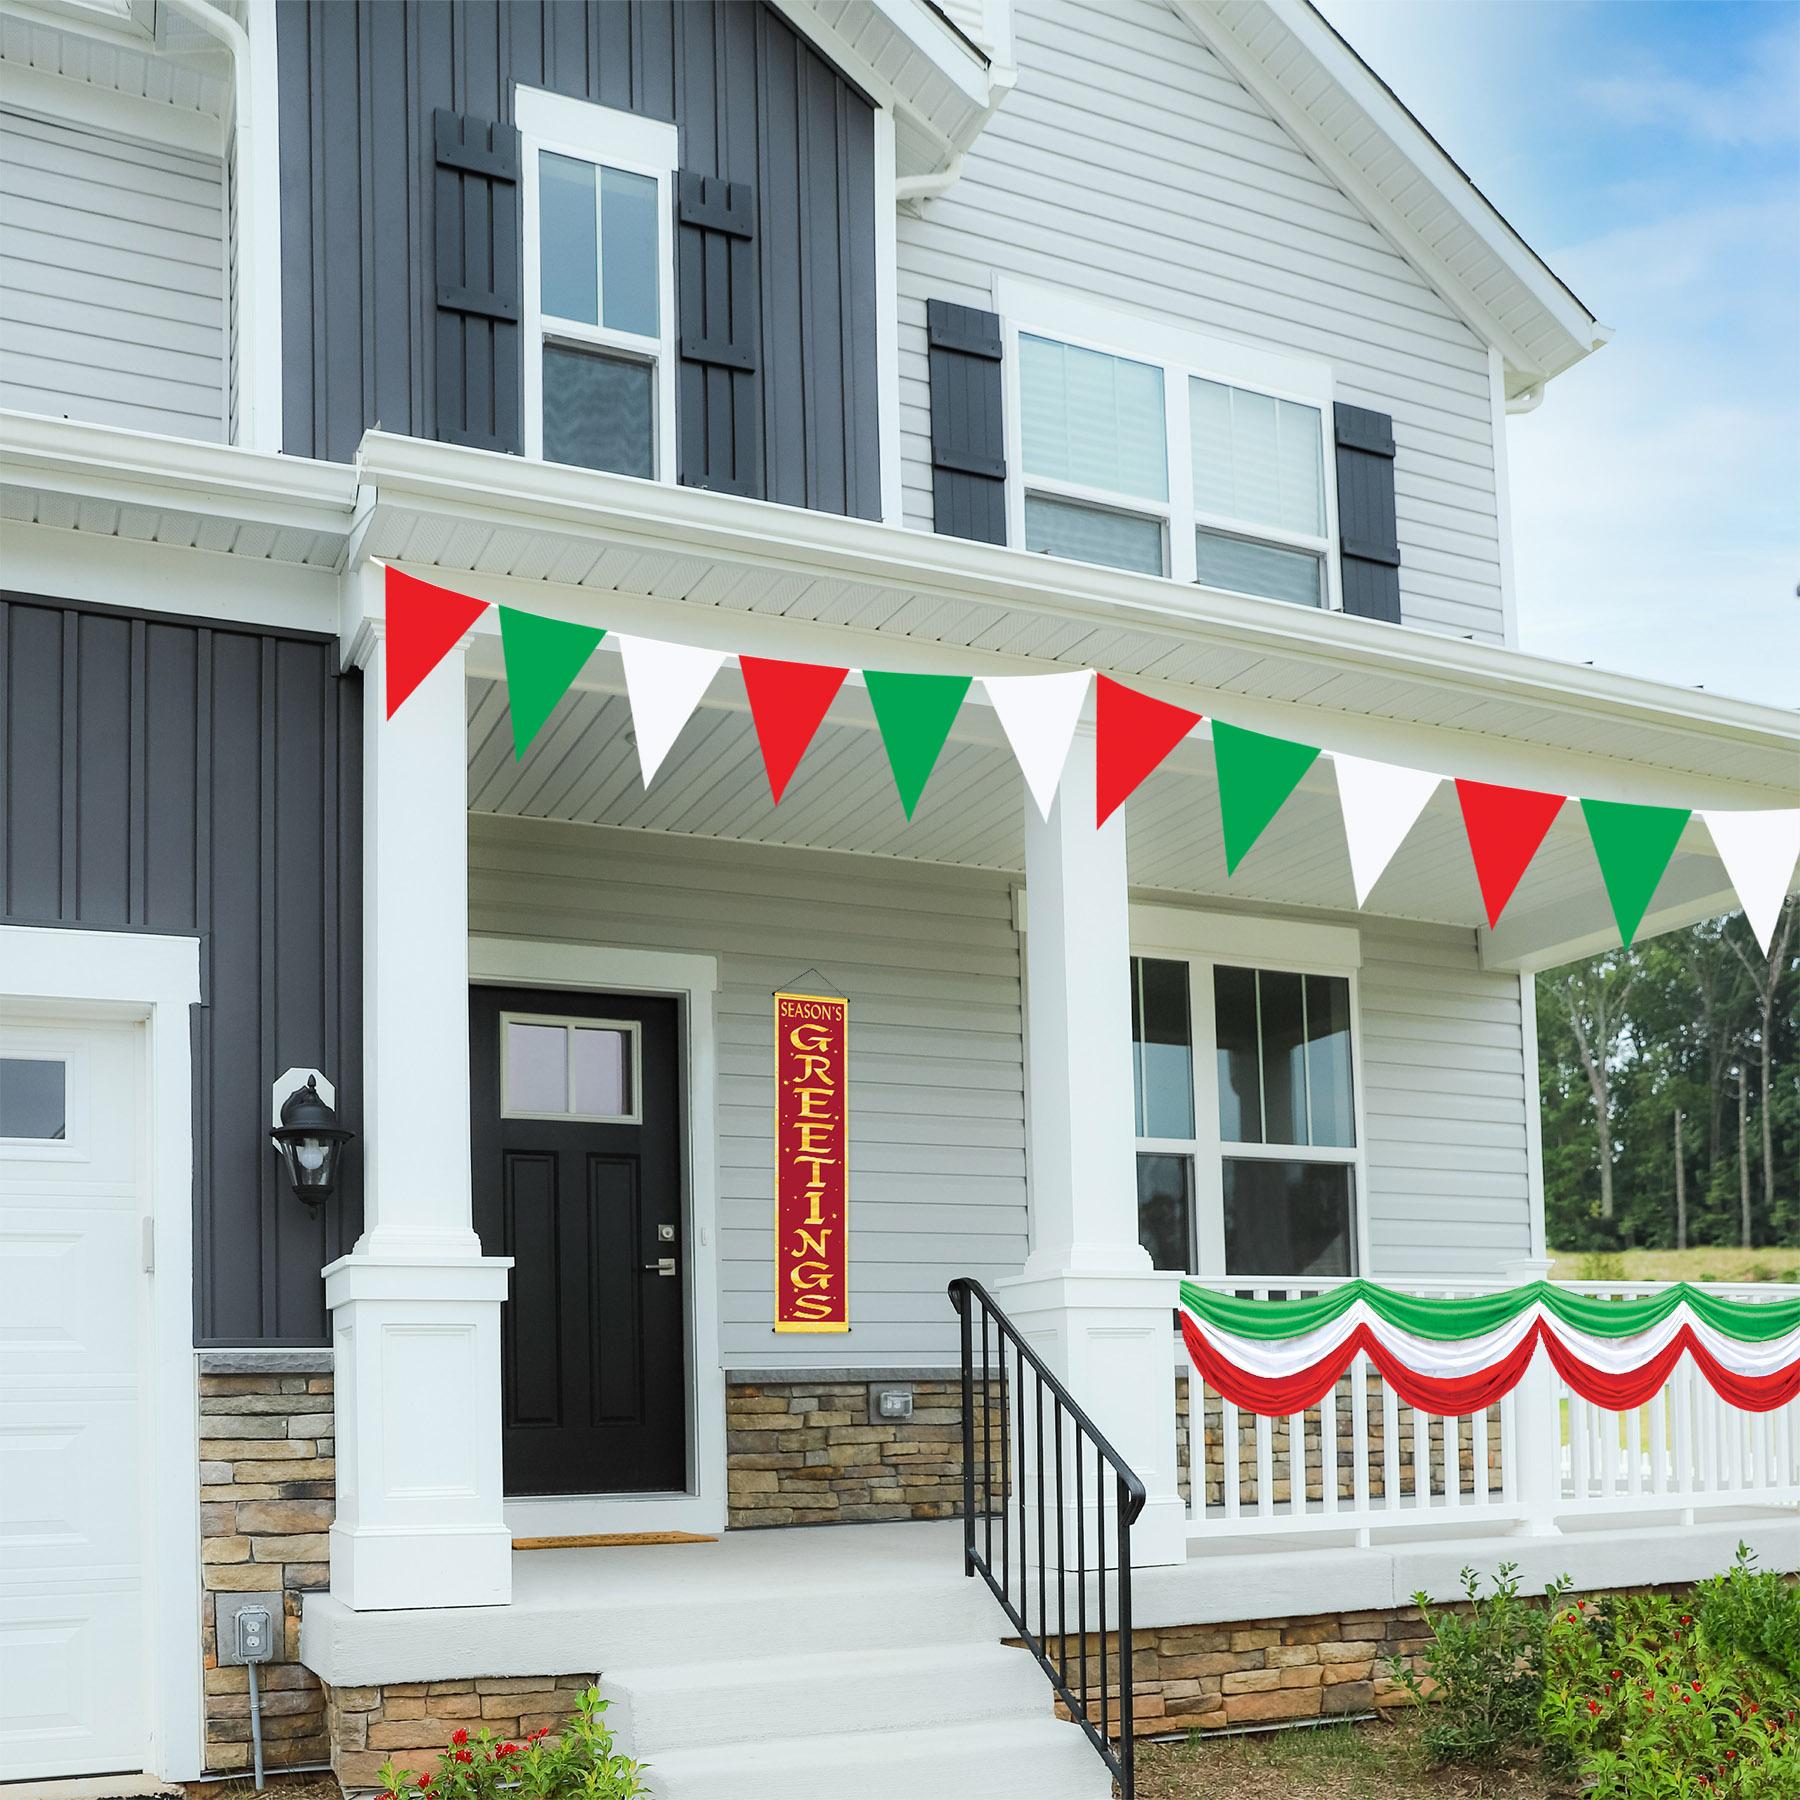 30 ft. Beistle Red - White & Green Party Pennant Banner